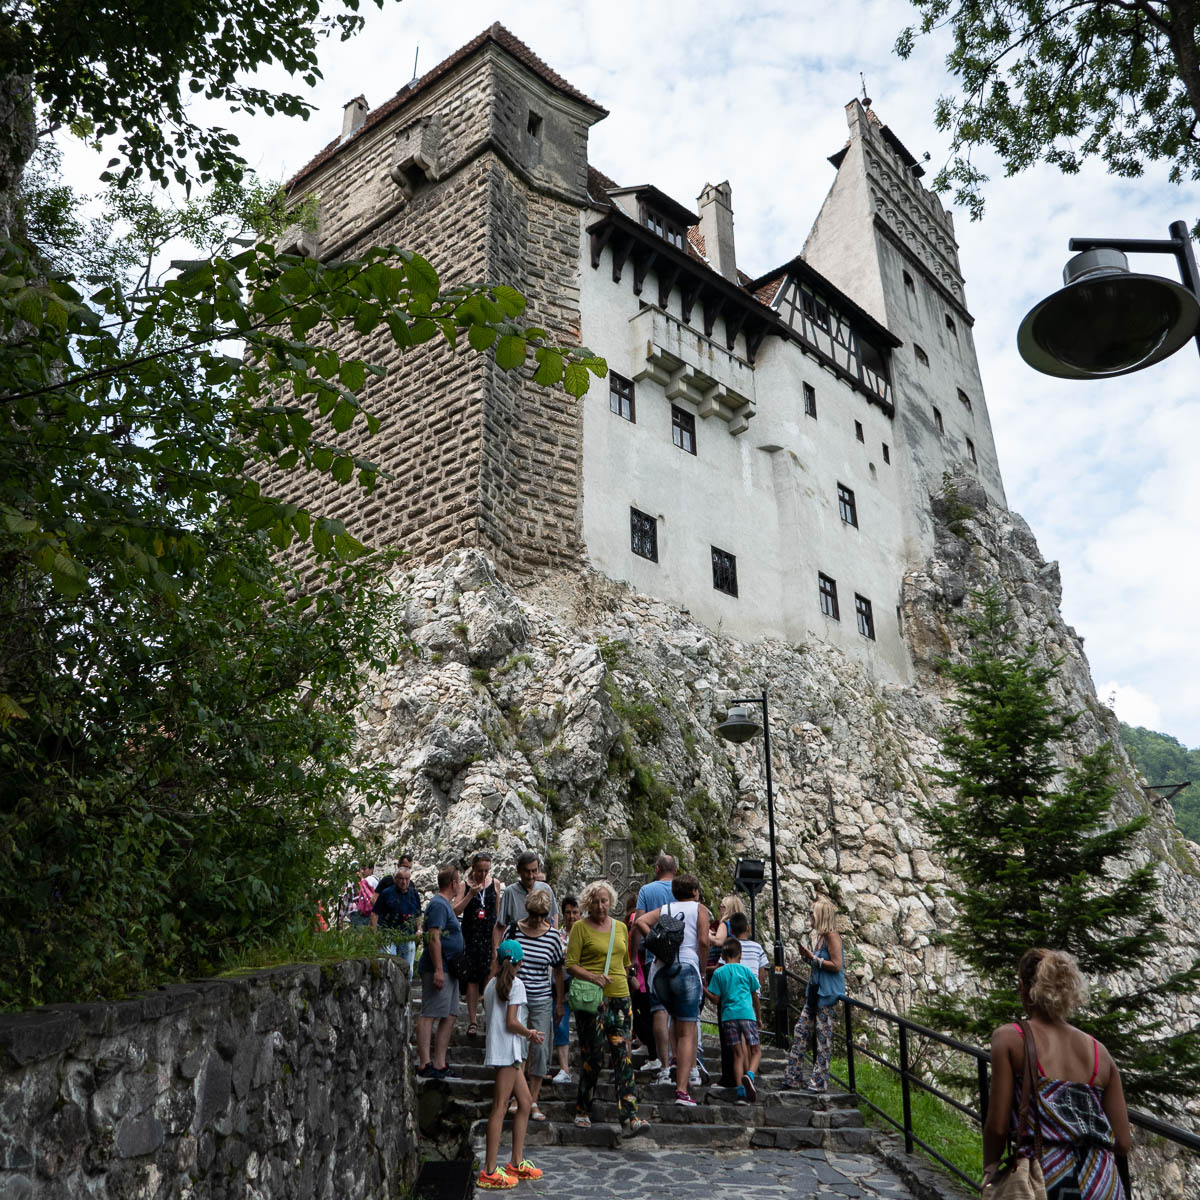 Walking up to the Bran castle